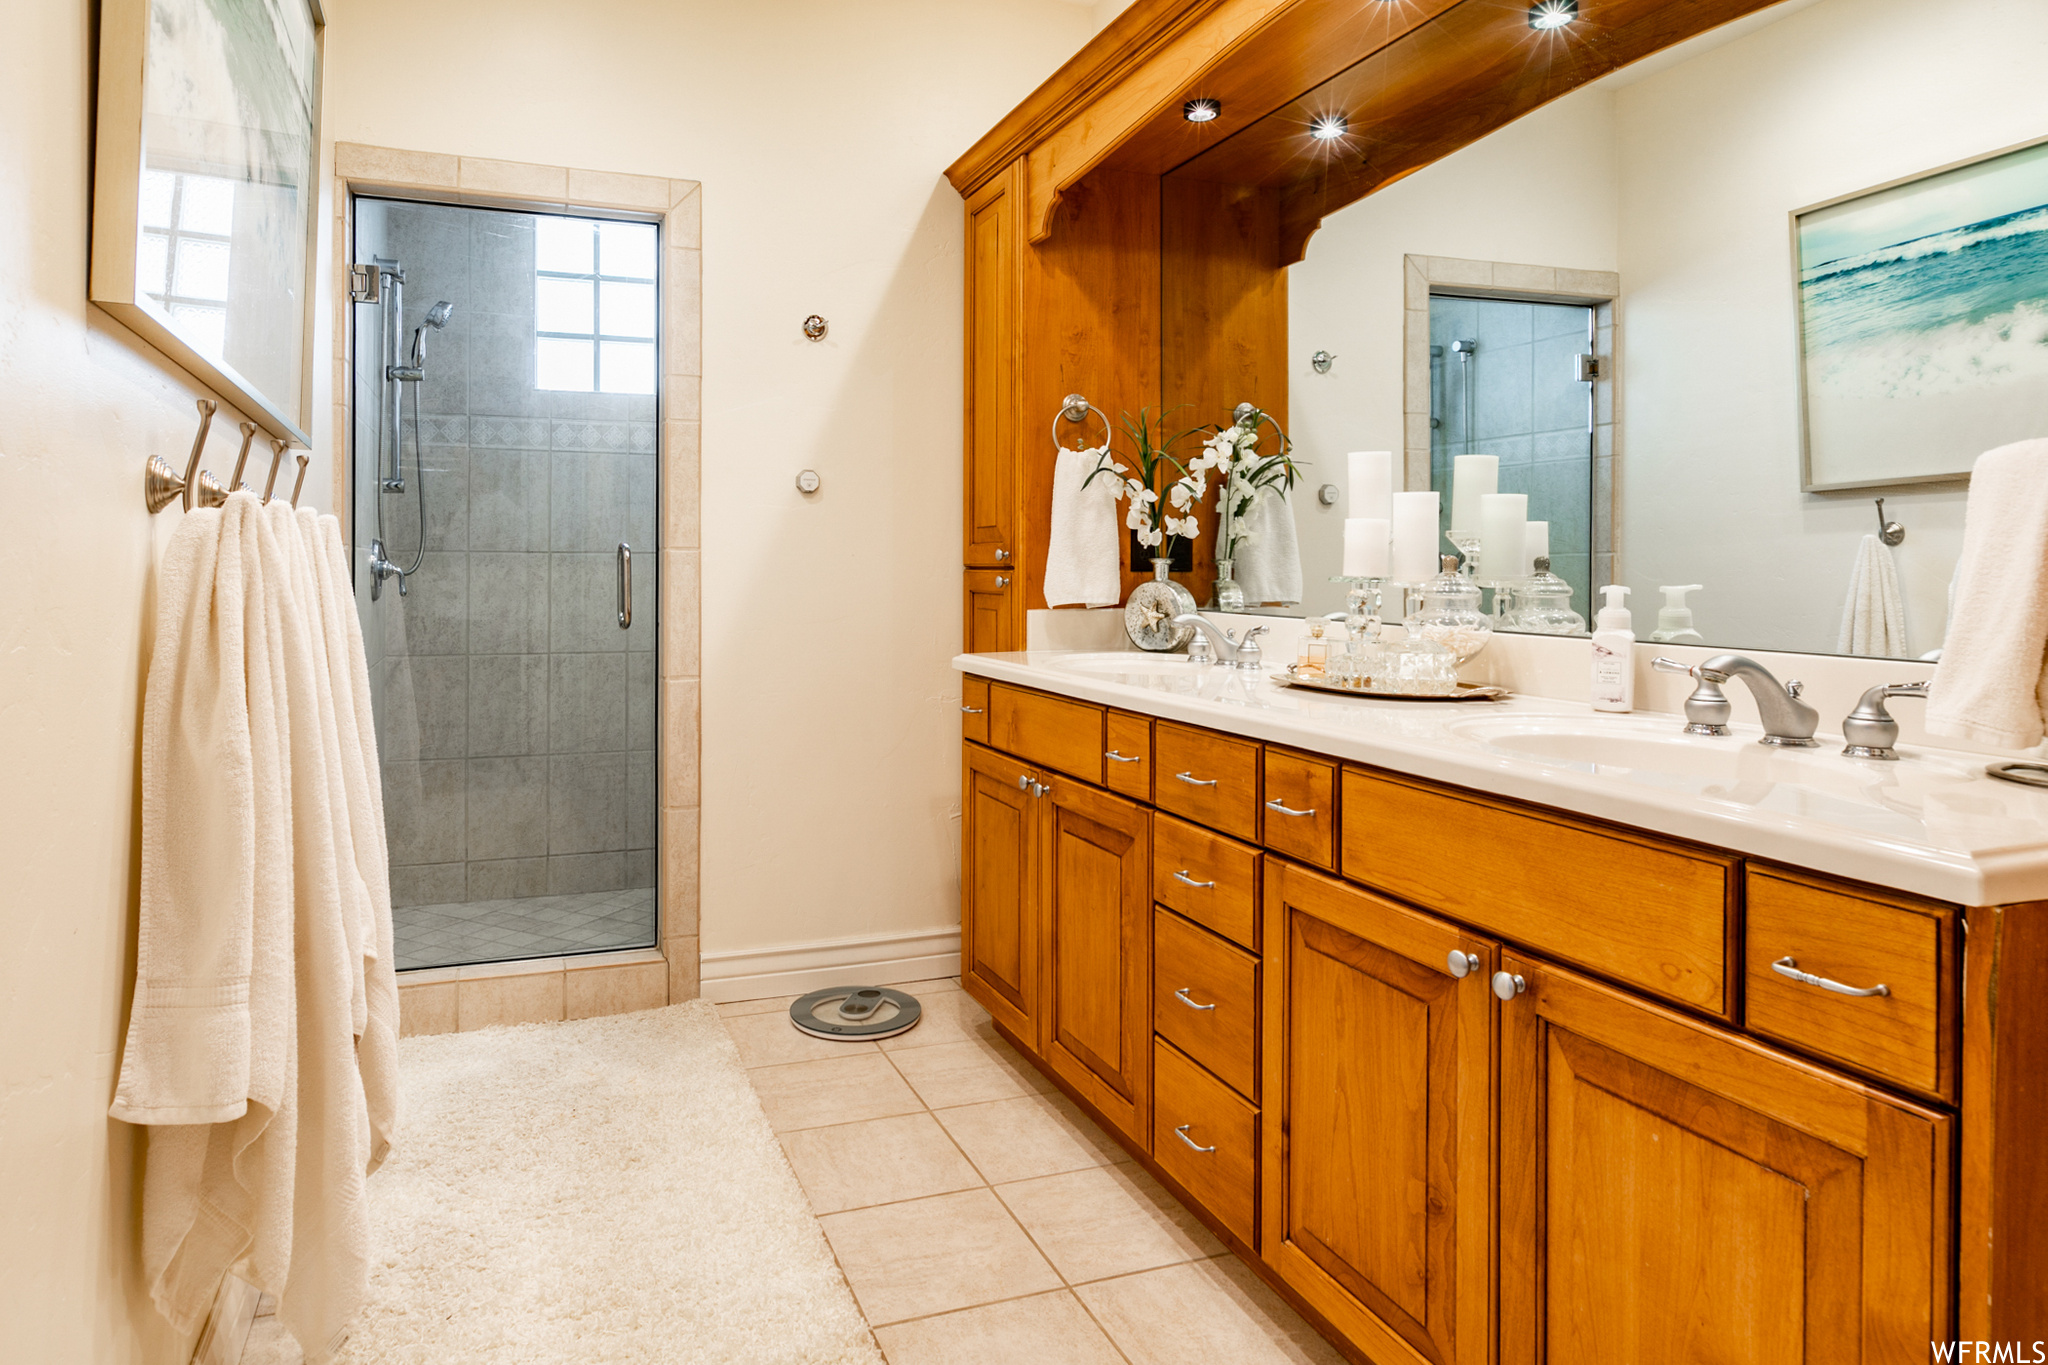 Extra-long vanity with lighted, canopied counter top & double sinks. Huge Shower has a glass block window. There is a partitioned room for the toilet.